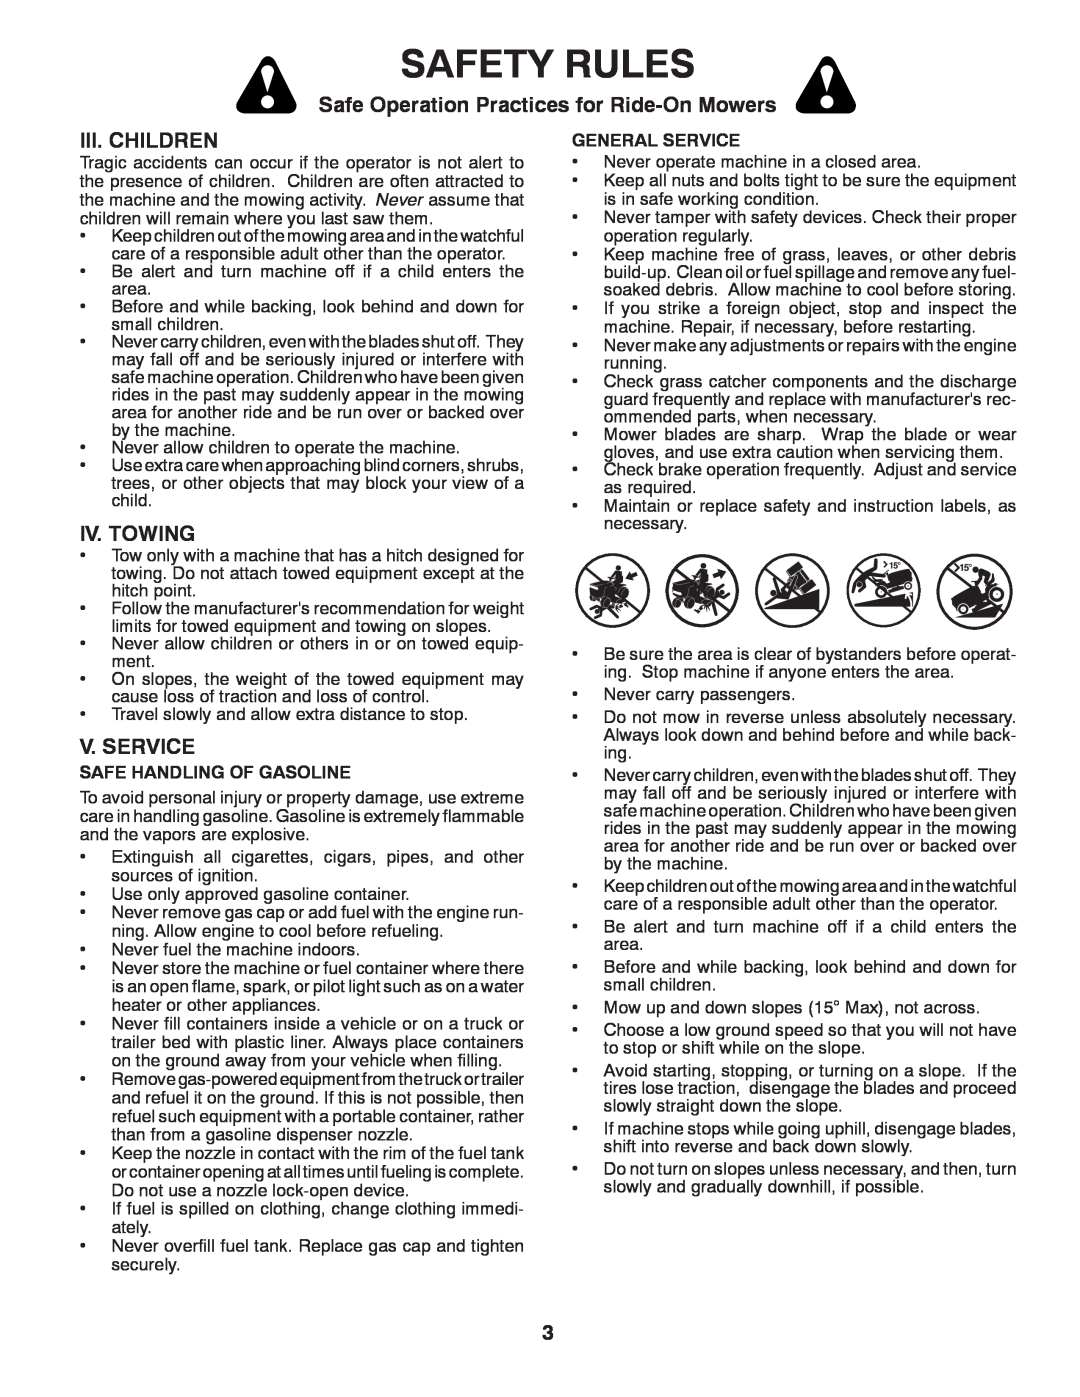 Poulan 425001 manual Iii. Children, Iv. Towing, V. Service, Safety Rules, Safe Operation Practices for Ride-On Mowers 